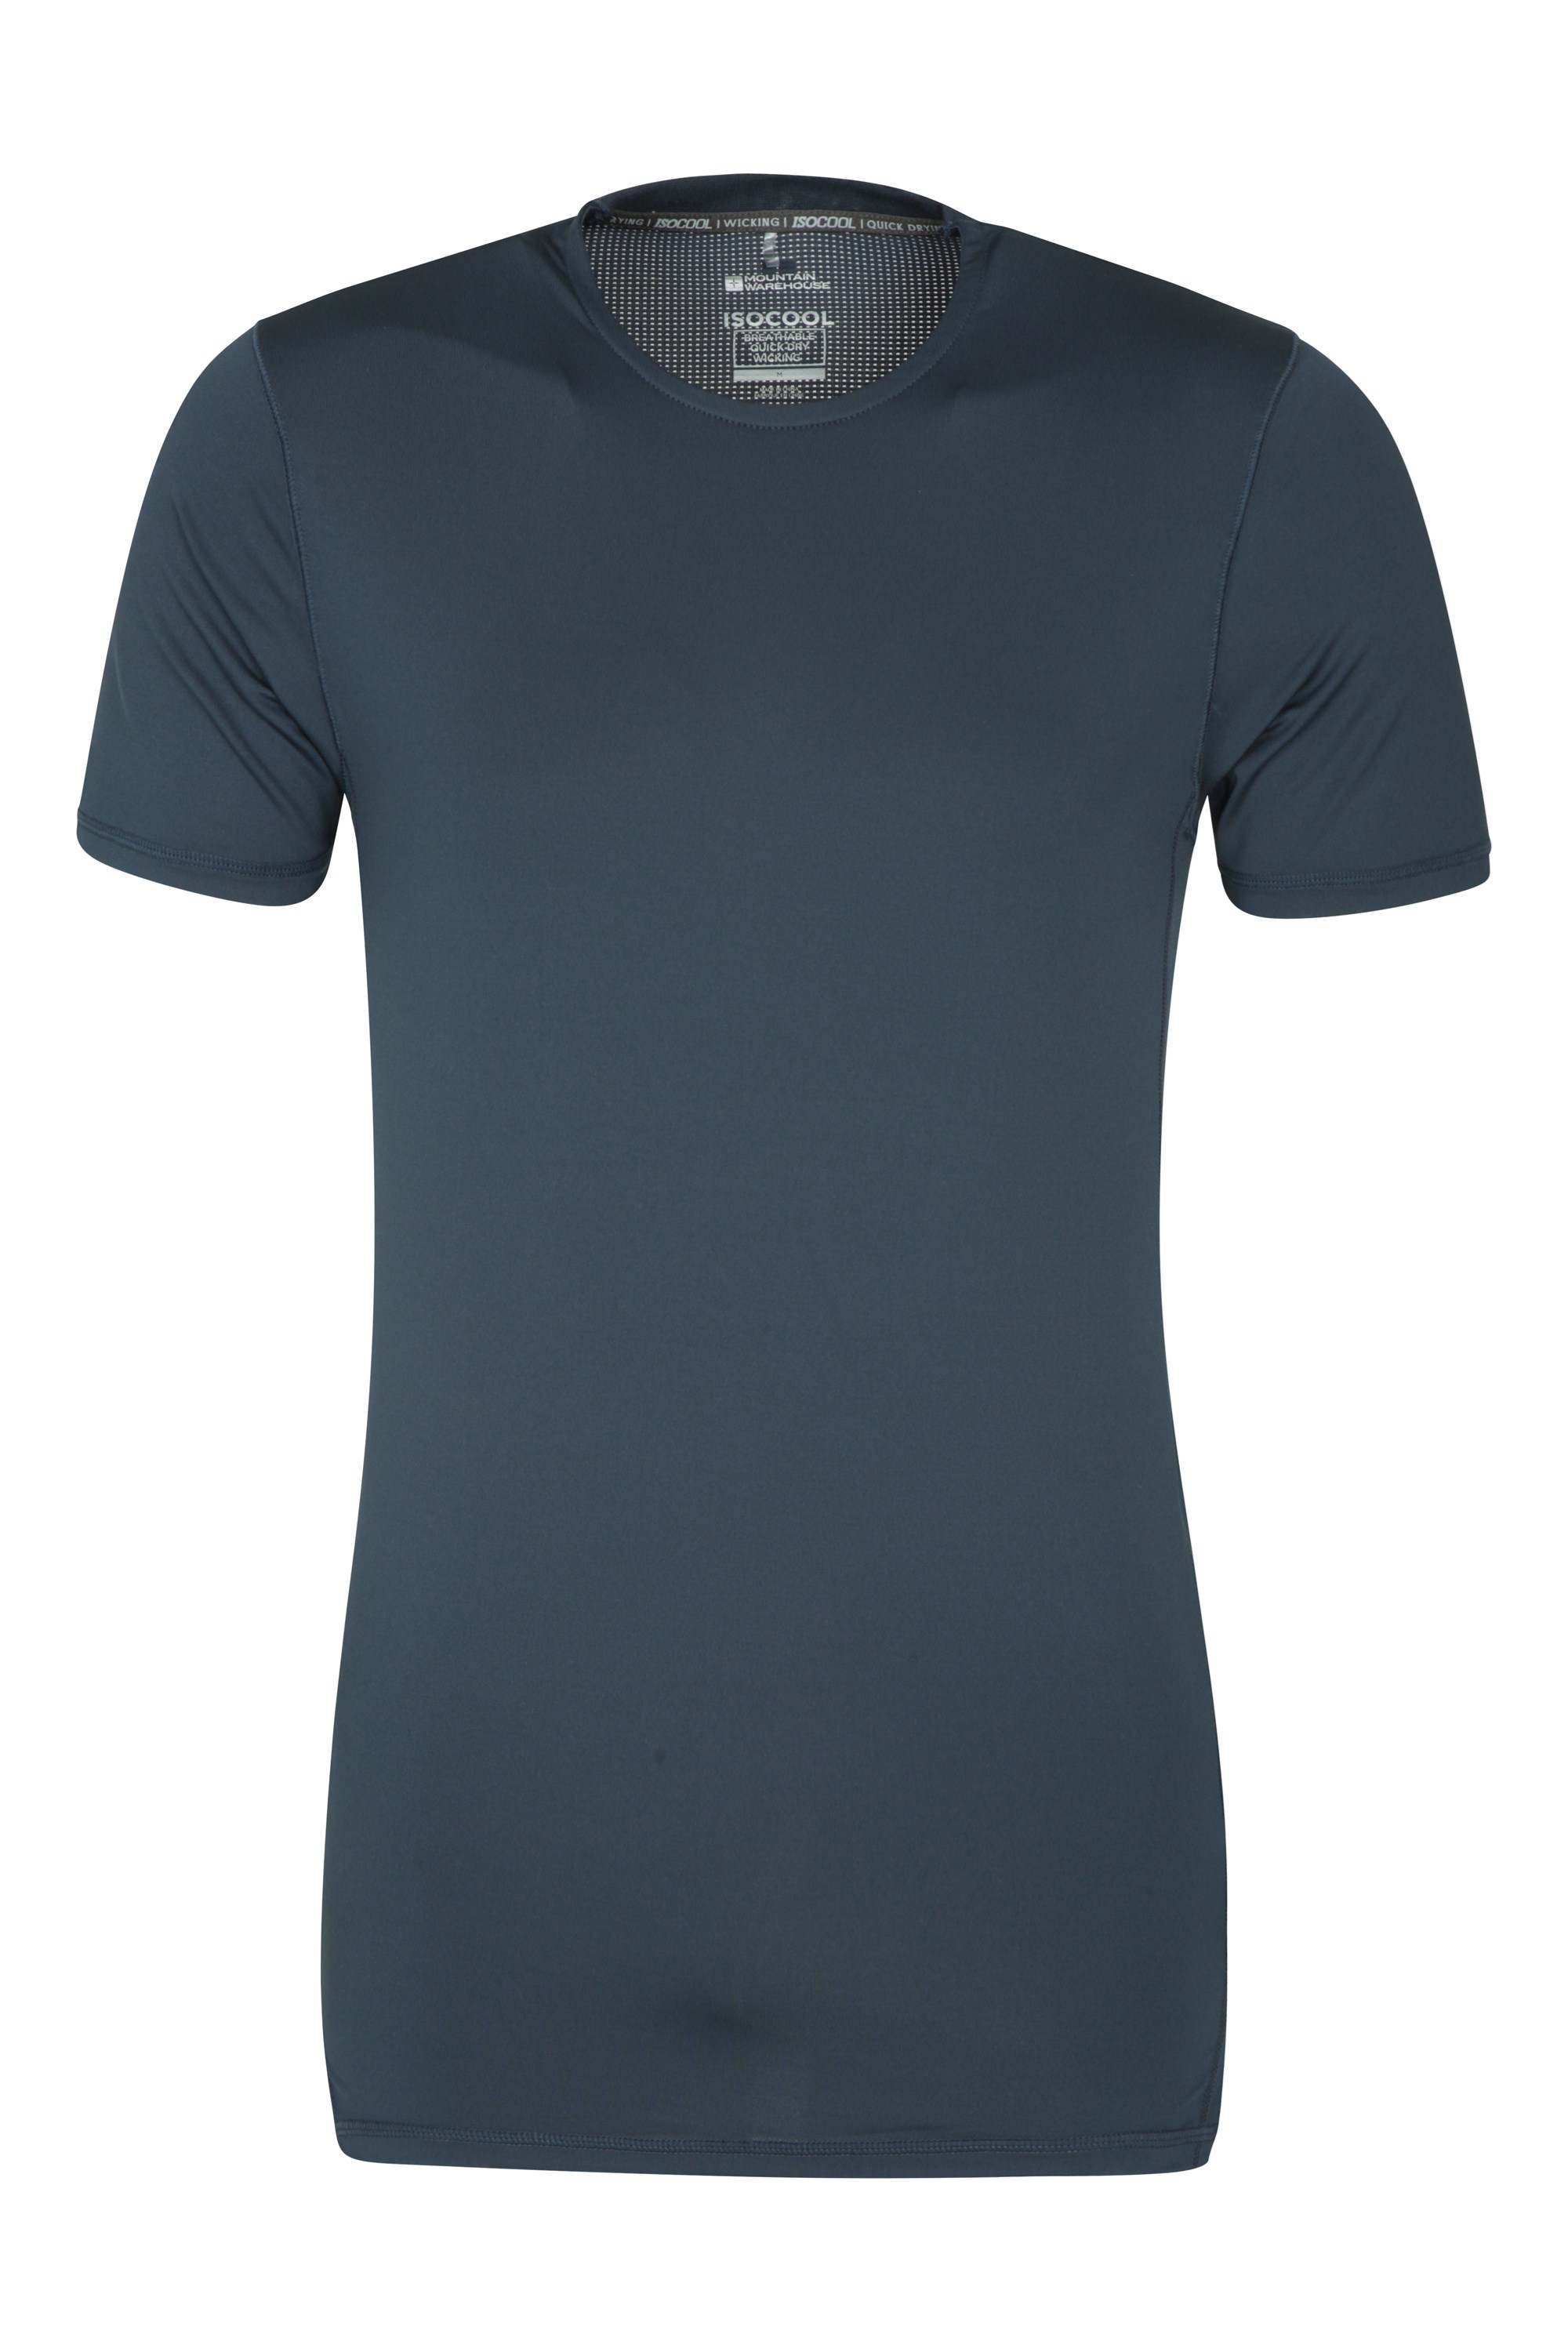 Tee-shirt Mantra IsoCool homme - Gris